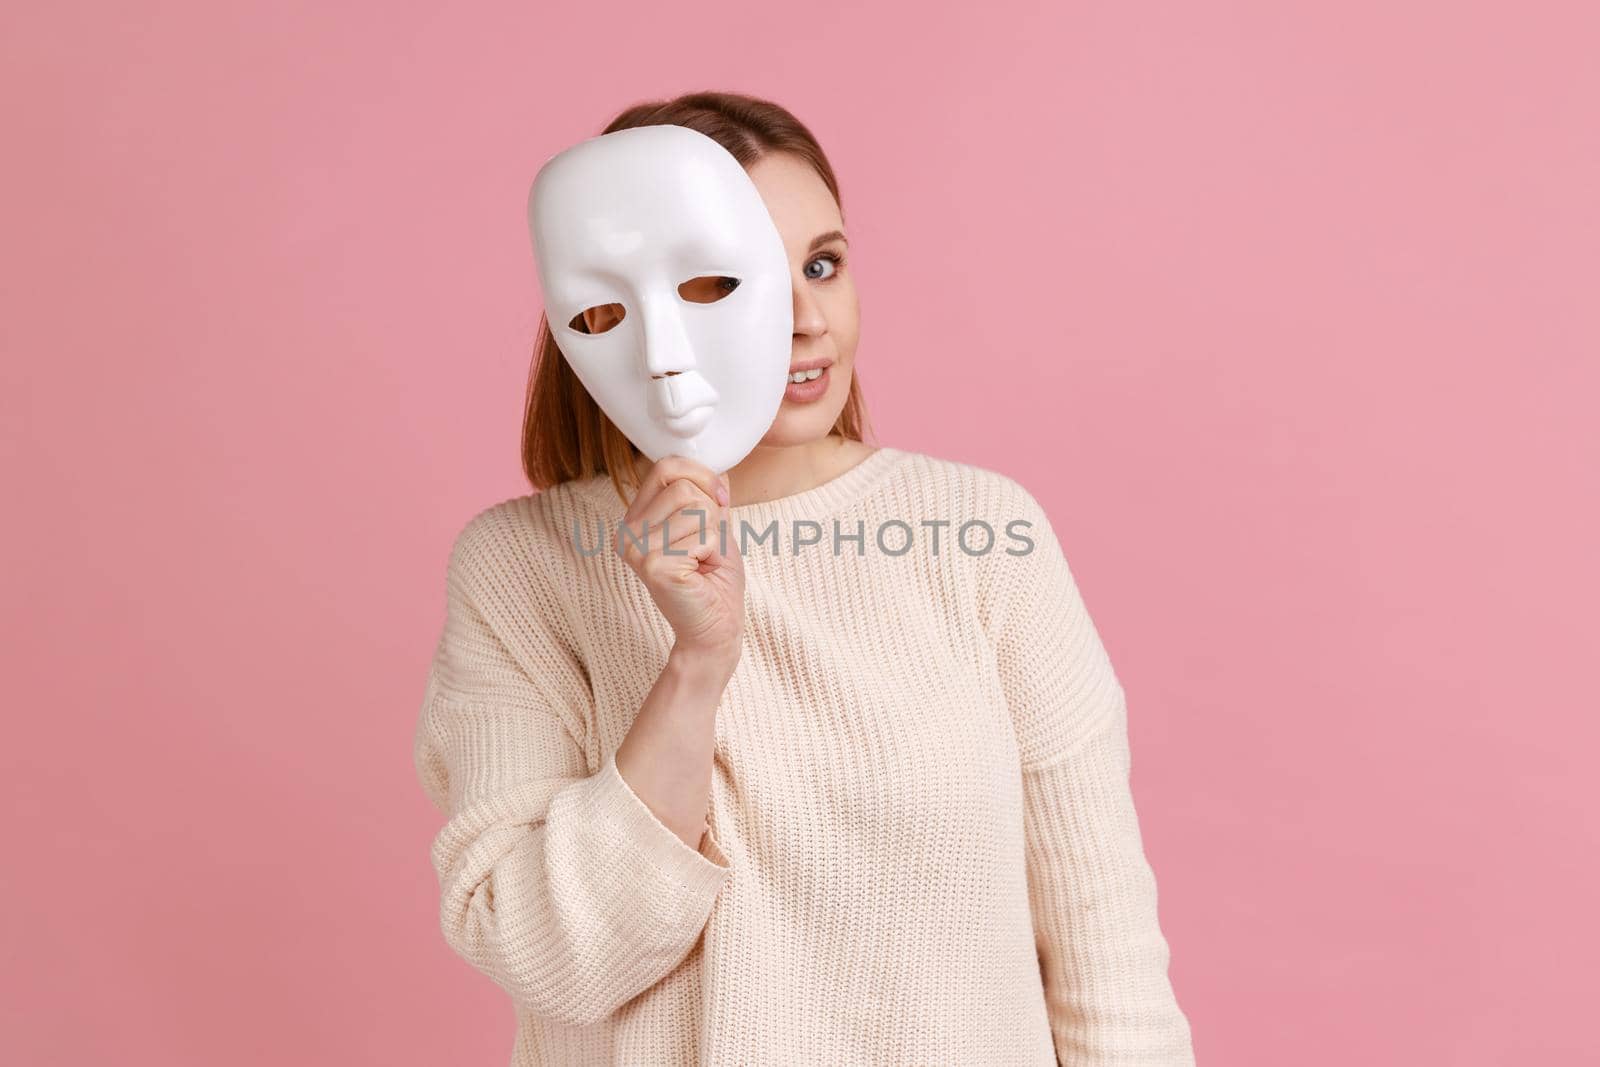 Portrait of smiling blond woman holding white mask, peeking, looking at camera, pretending to be another person, wearing white sweater. Indoor studio shot isolated on pink background.